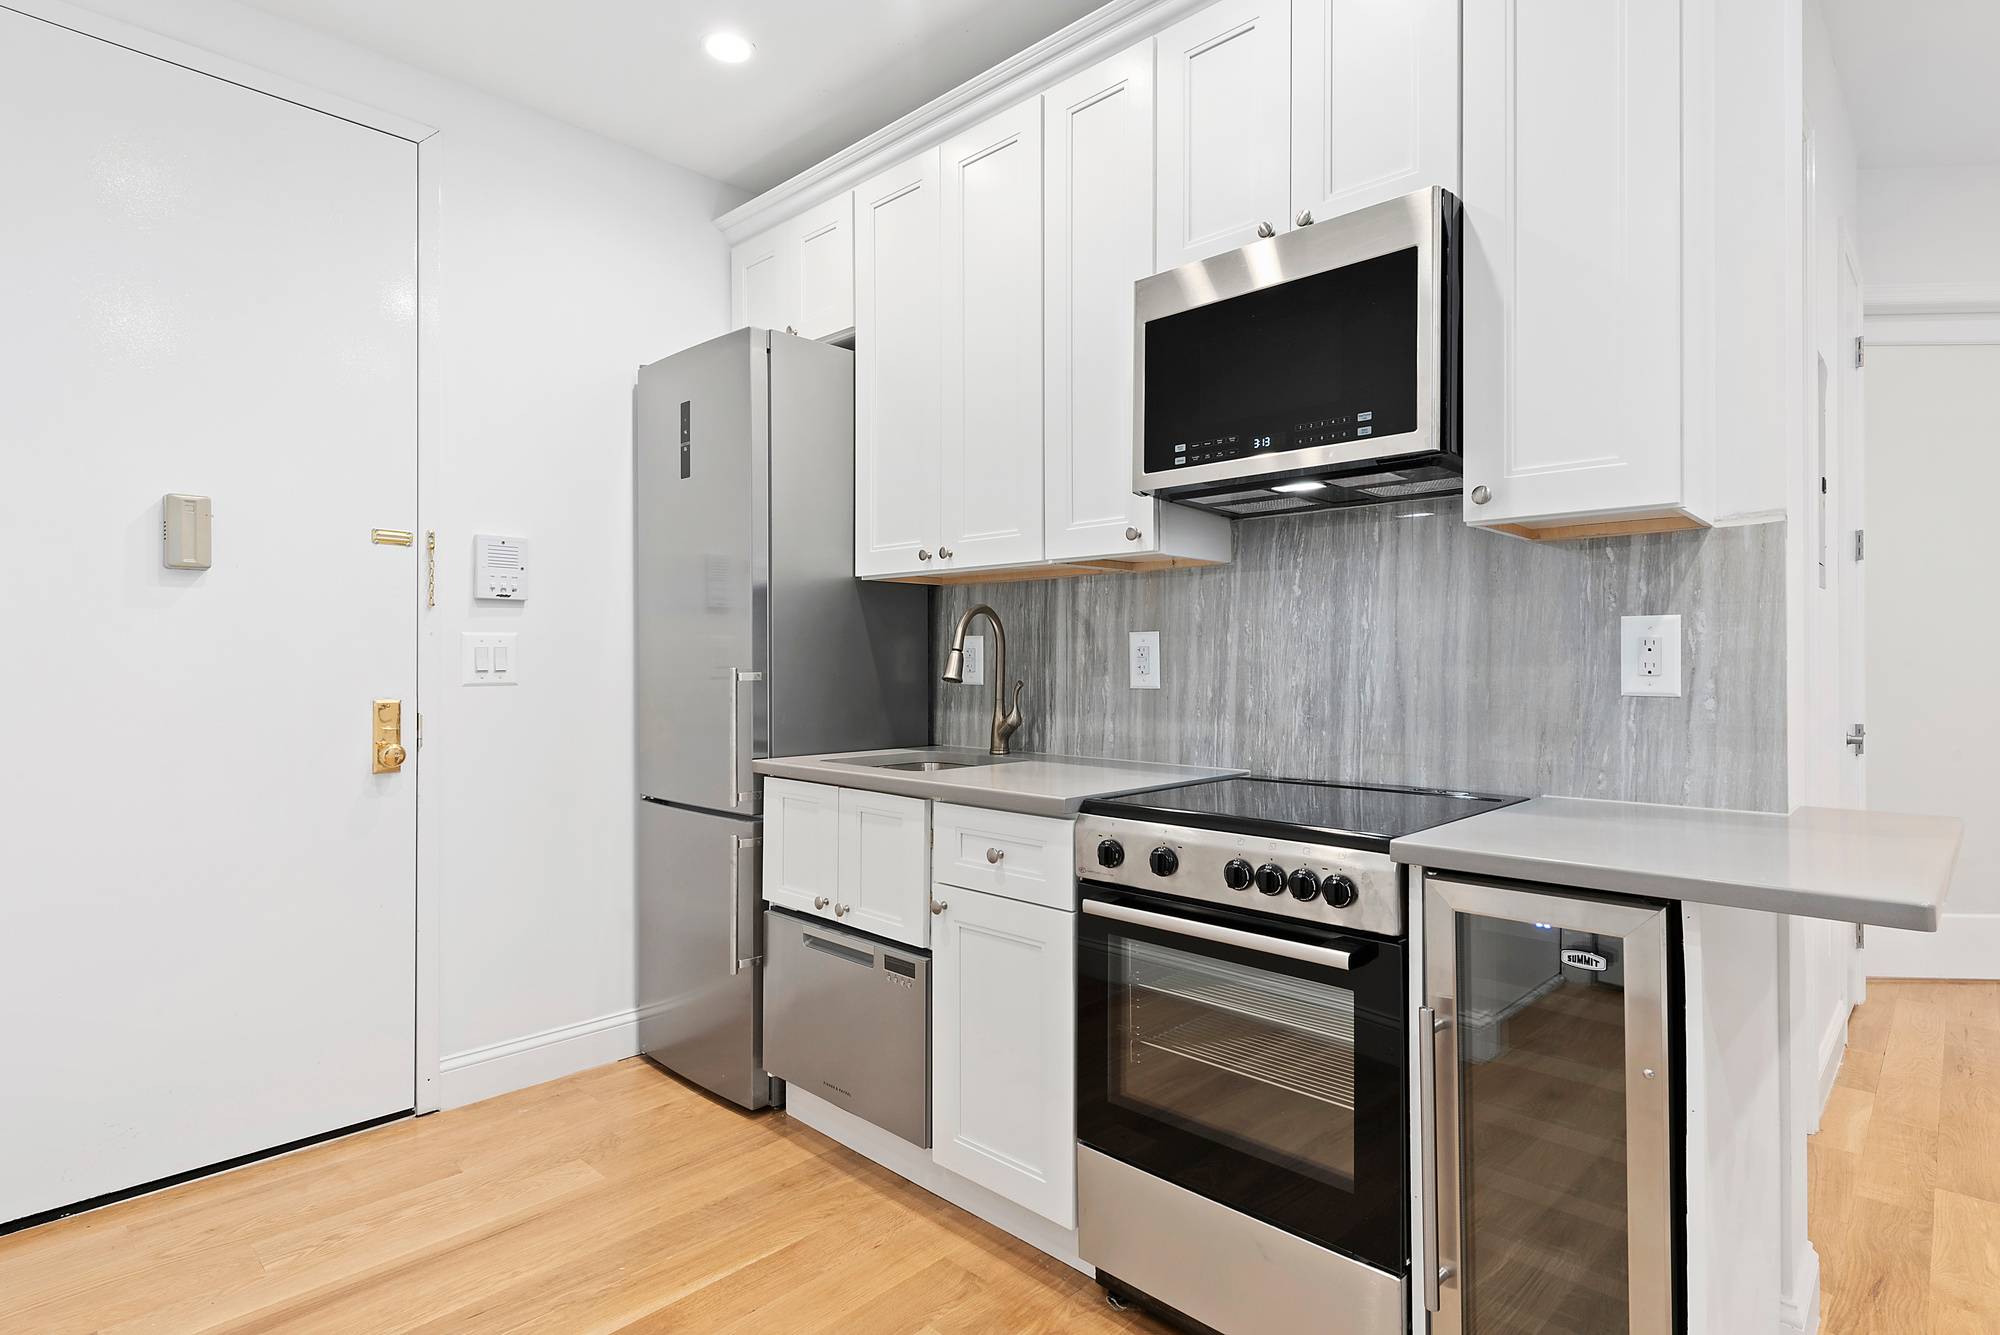 Brand New Completely GUT RENOVATED Large East Village 3 Bedroom 2 Bathroom Apartment.